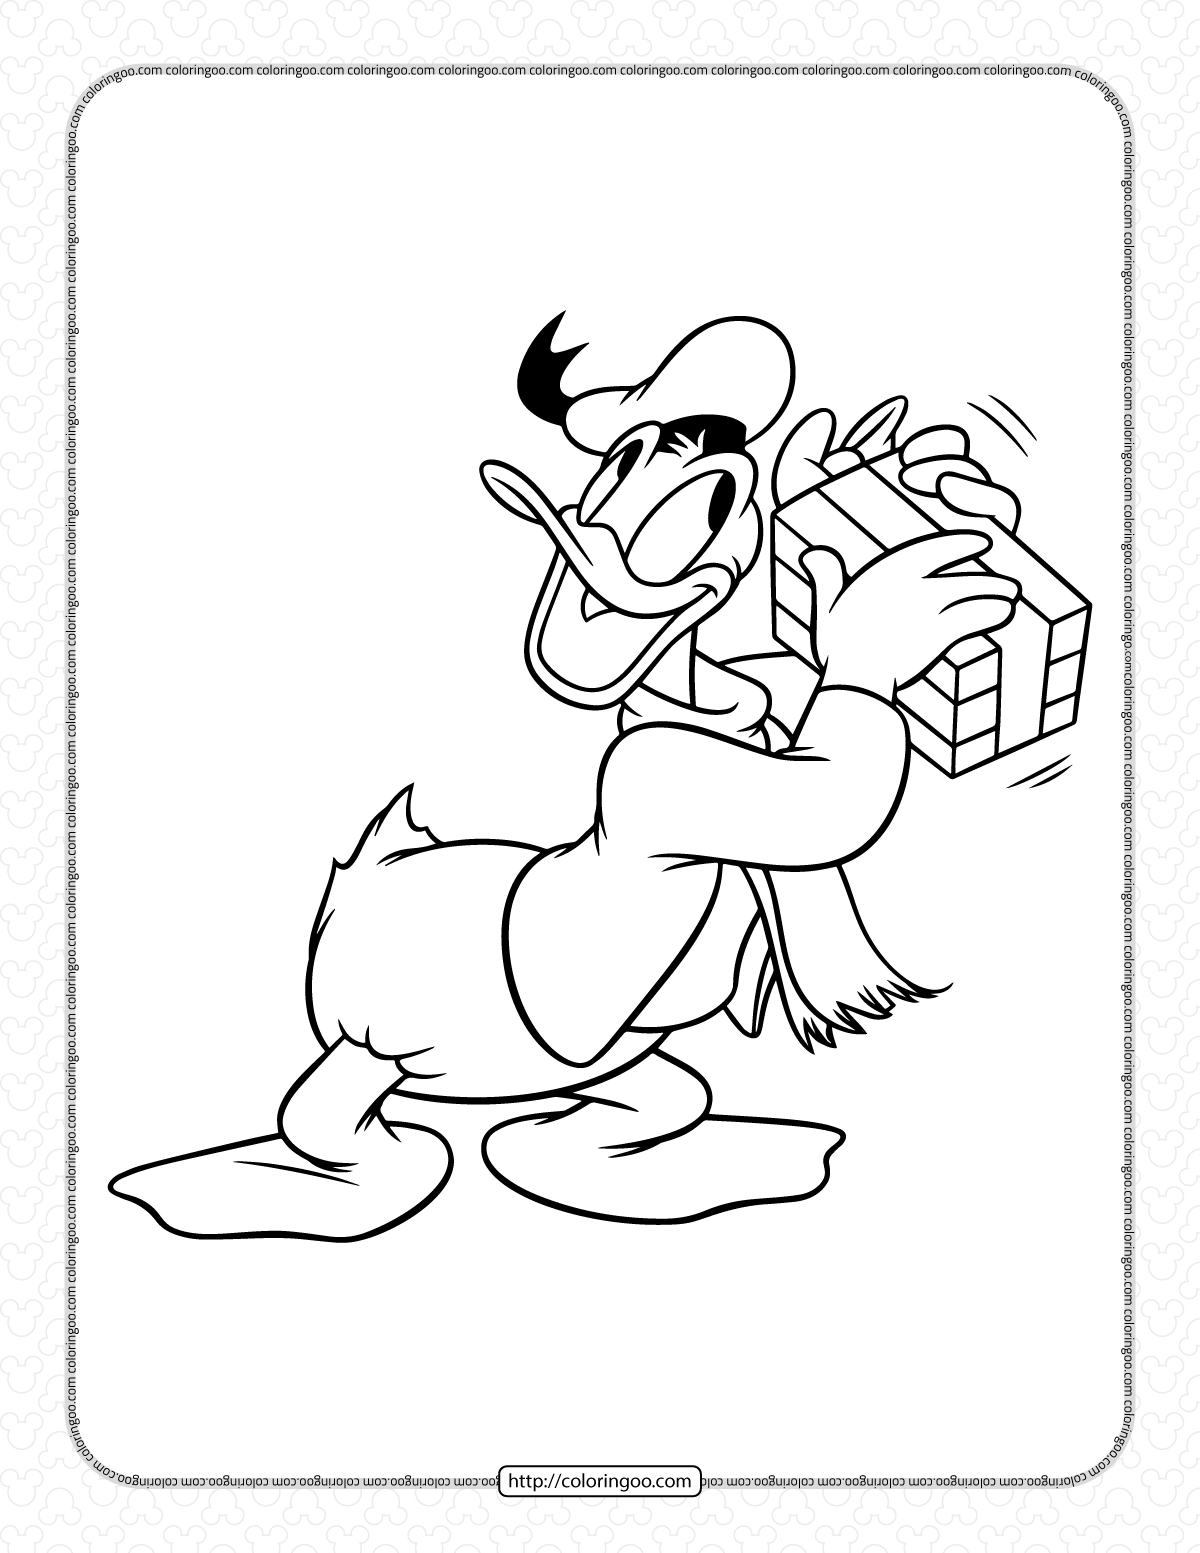 donald duck with a gift box coloring page